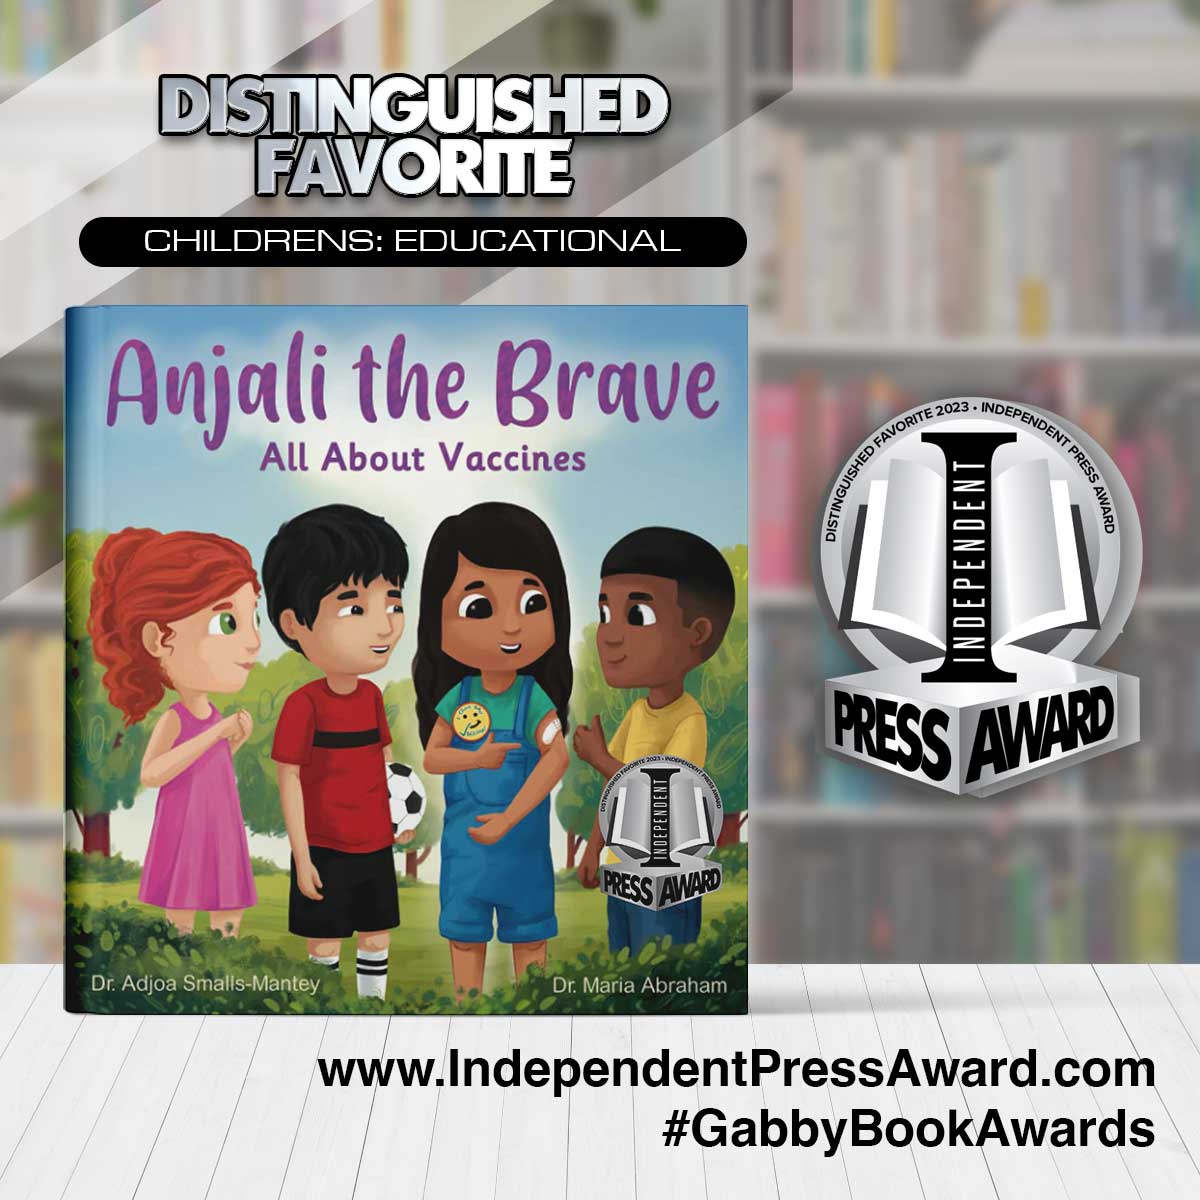 The biggest reward is when a child or parent shares how @anjalithebrave helped them be brave when visiting the doctor.

But it's also an honor to be recognized by @GabbyBookAwards!

#GabbyBookAwards #2023IPA #anjalithebrave #childrensbooks @IndiesUnitedPub #IUPH #IndiesUnited